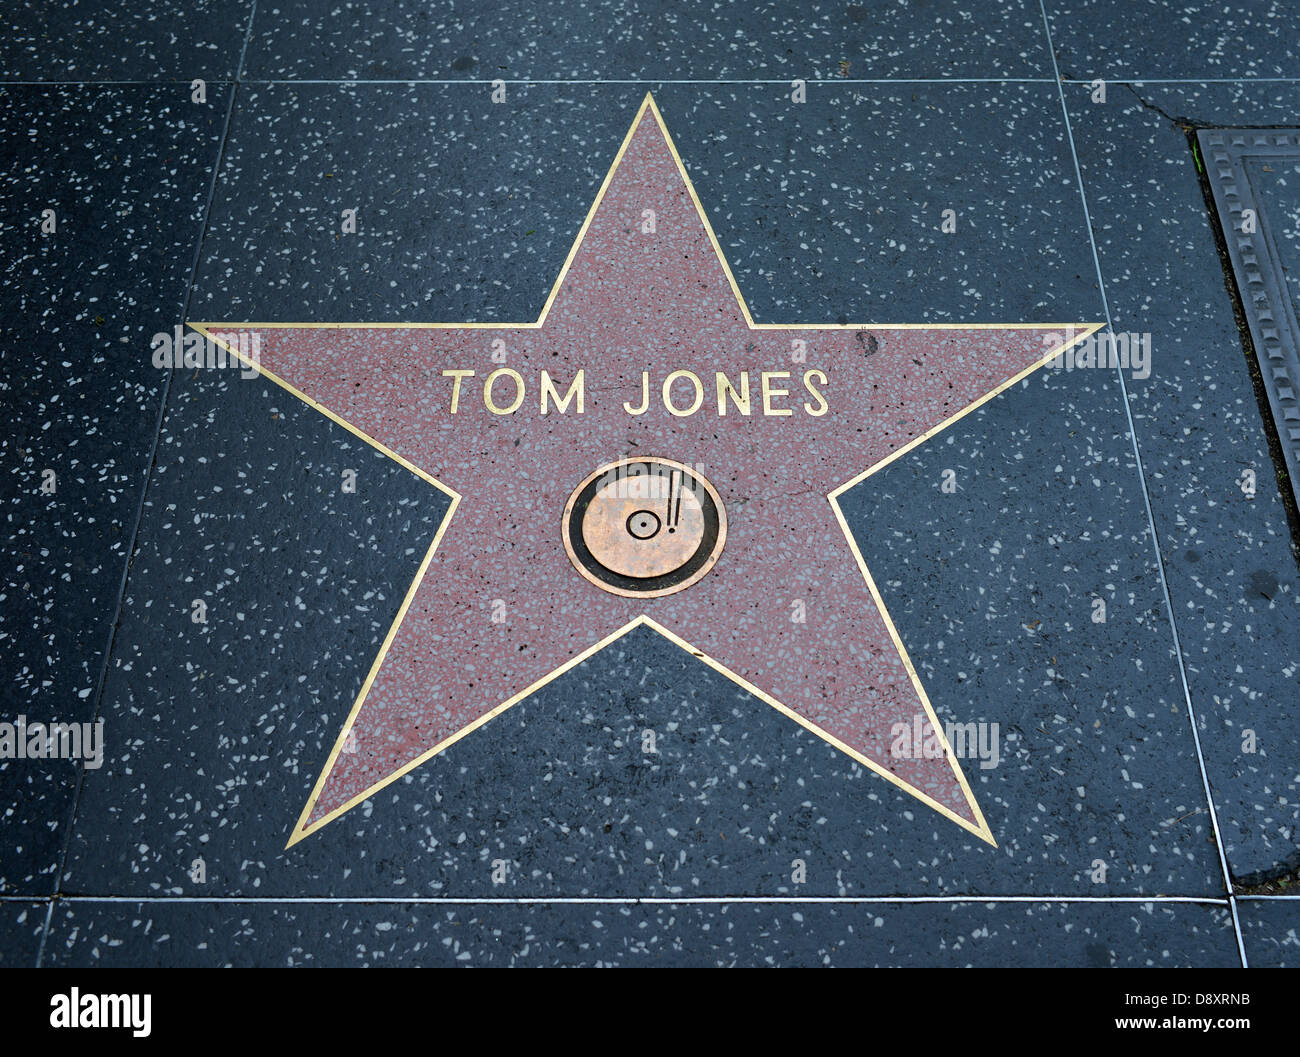 Terrazzo star for artist Tom Jones, category Music, Drumming of Fame, Hollywood boulevard, Hollywood, Los Angeles, California, t Stock Photo